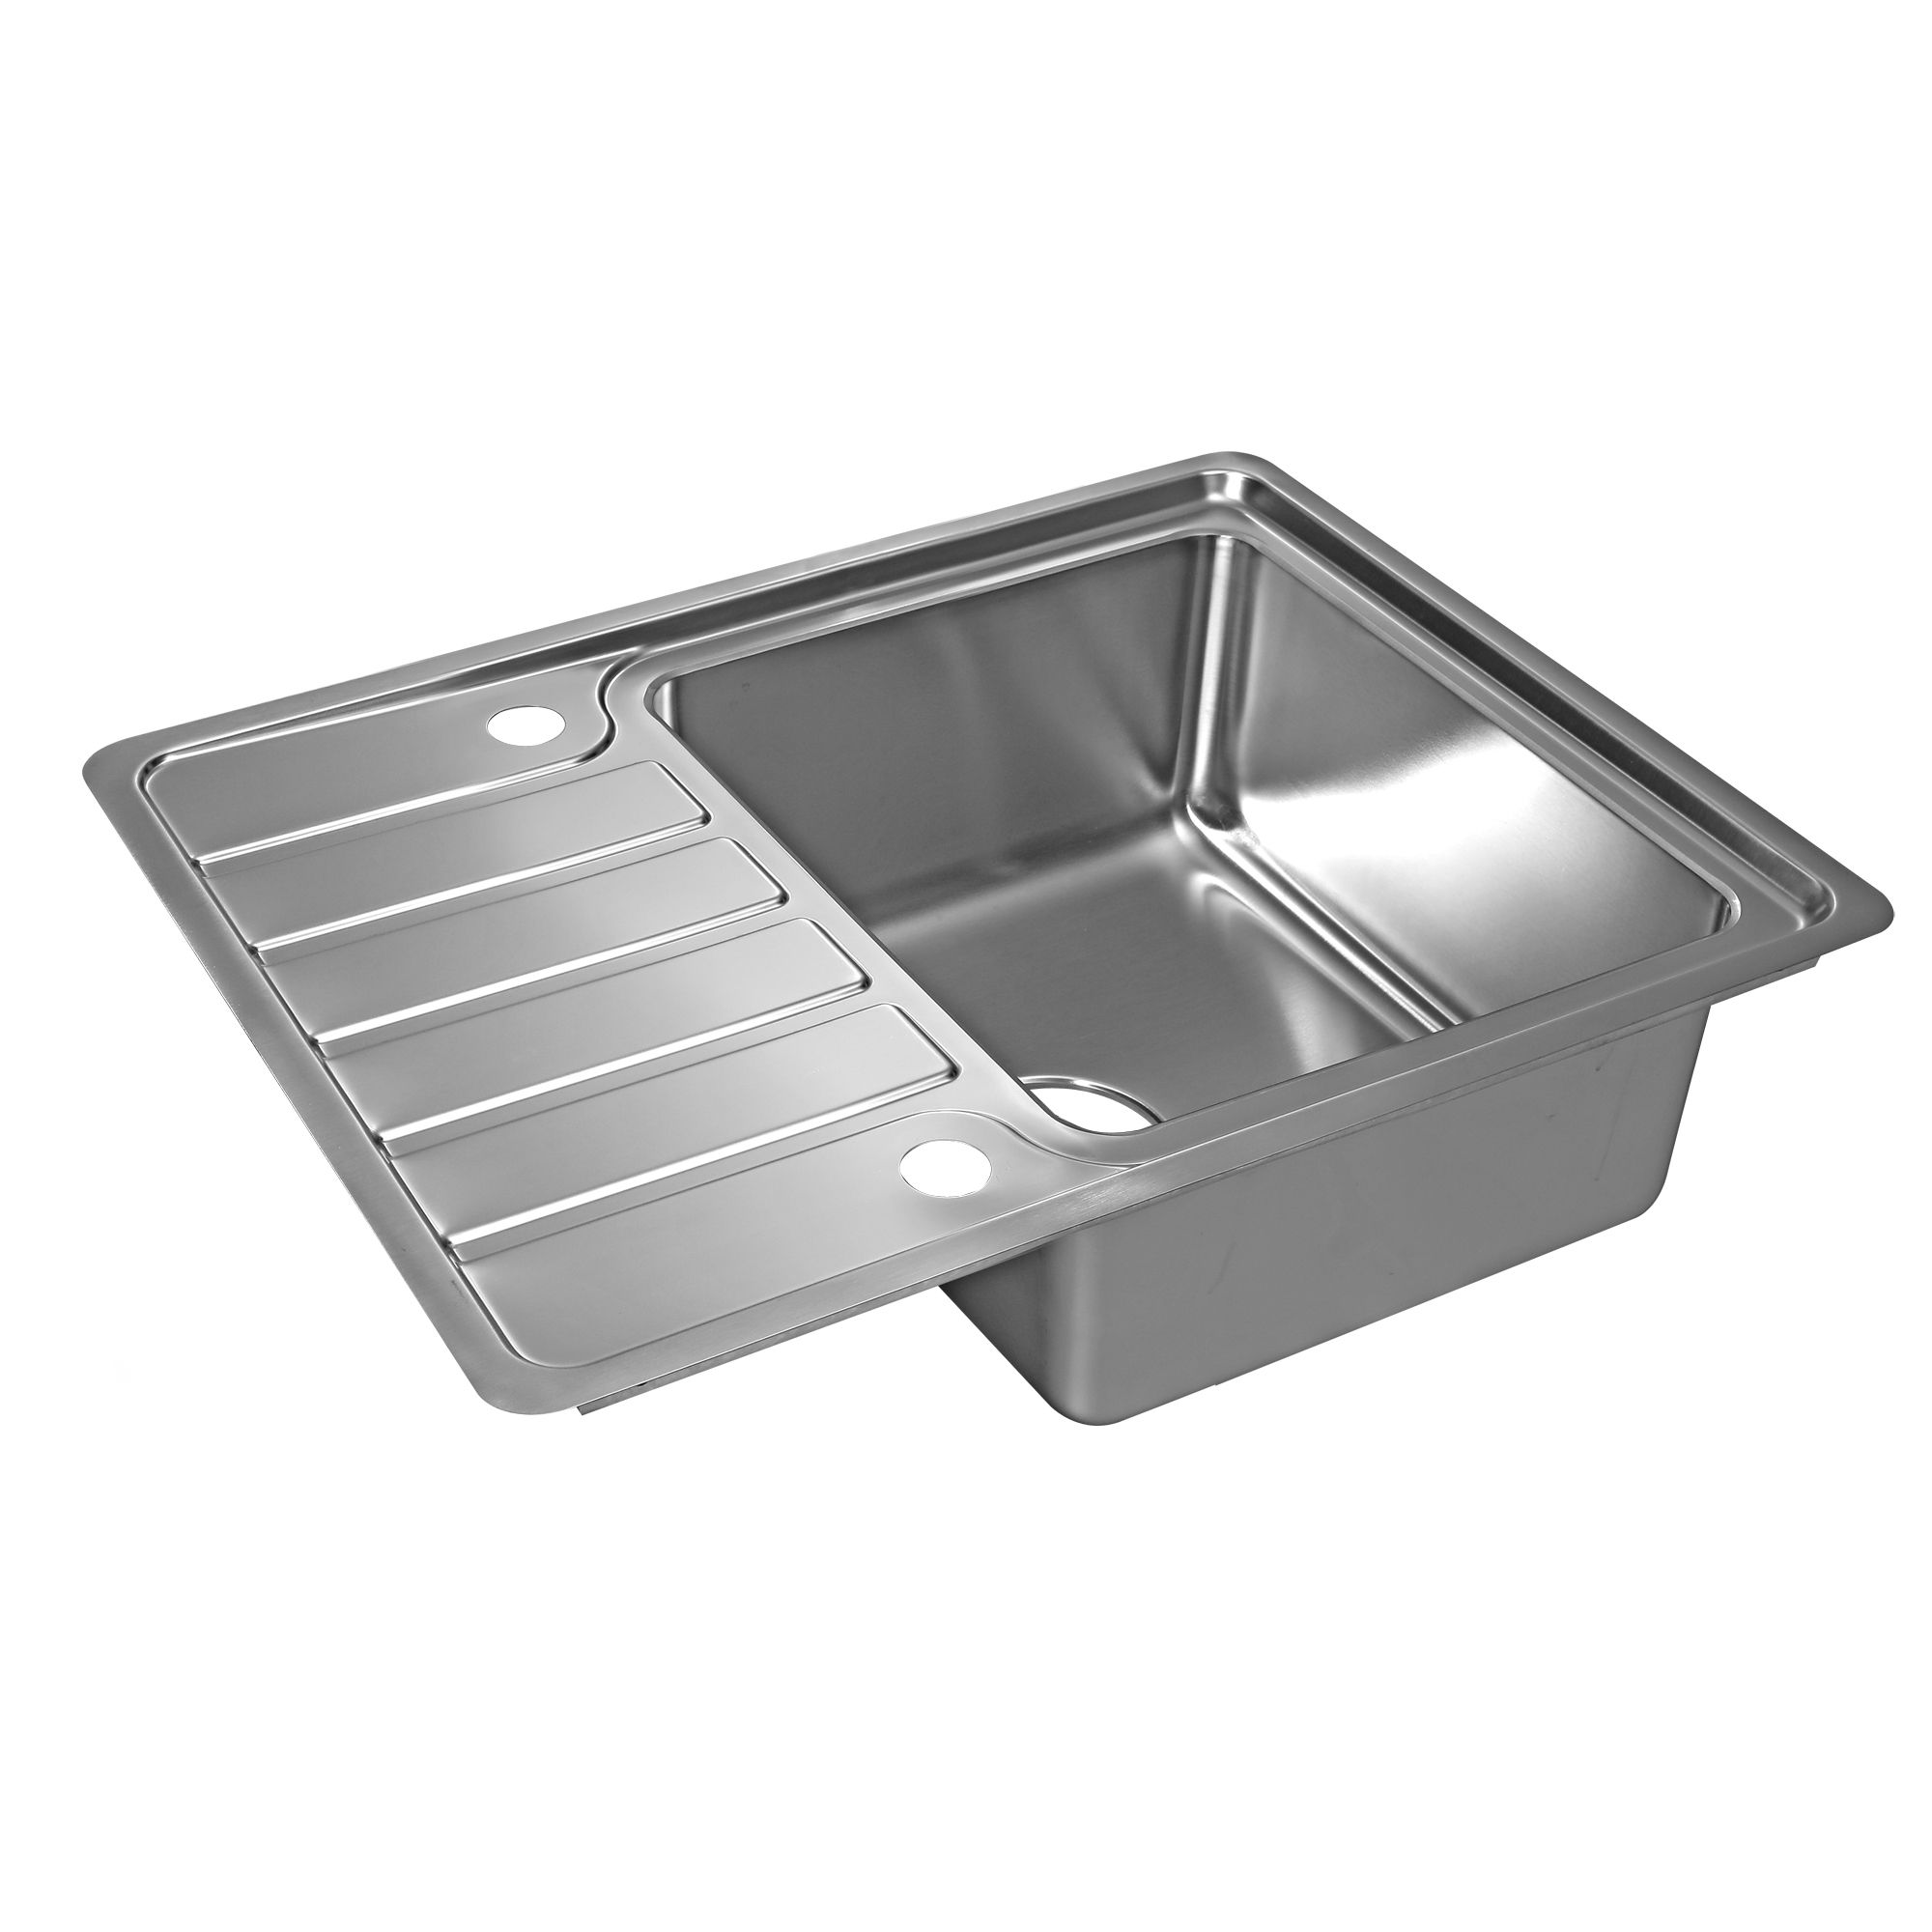 GoodHome Quassia Brushed Stainless steel 1 Bowl Kitchen sink With compact drainer 505mm x 635mm